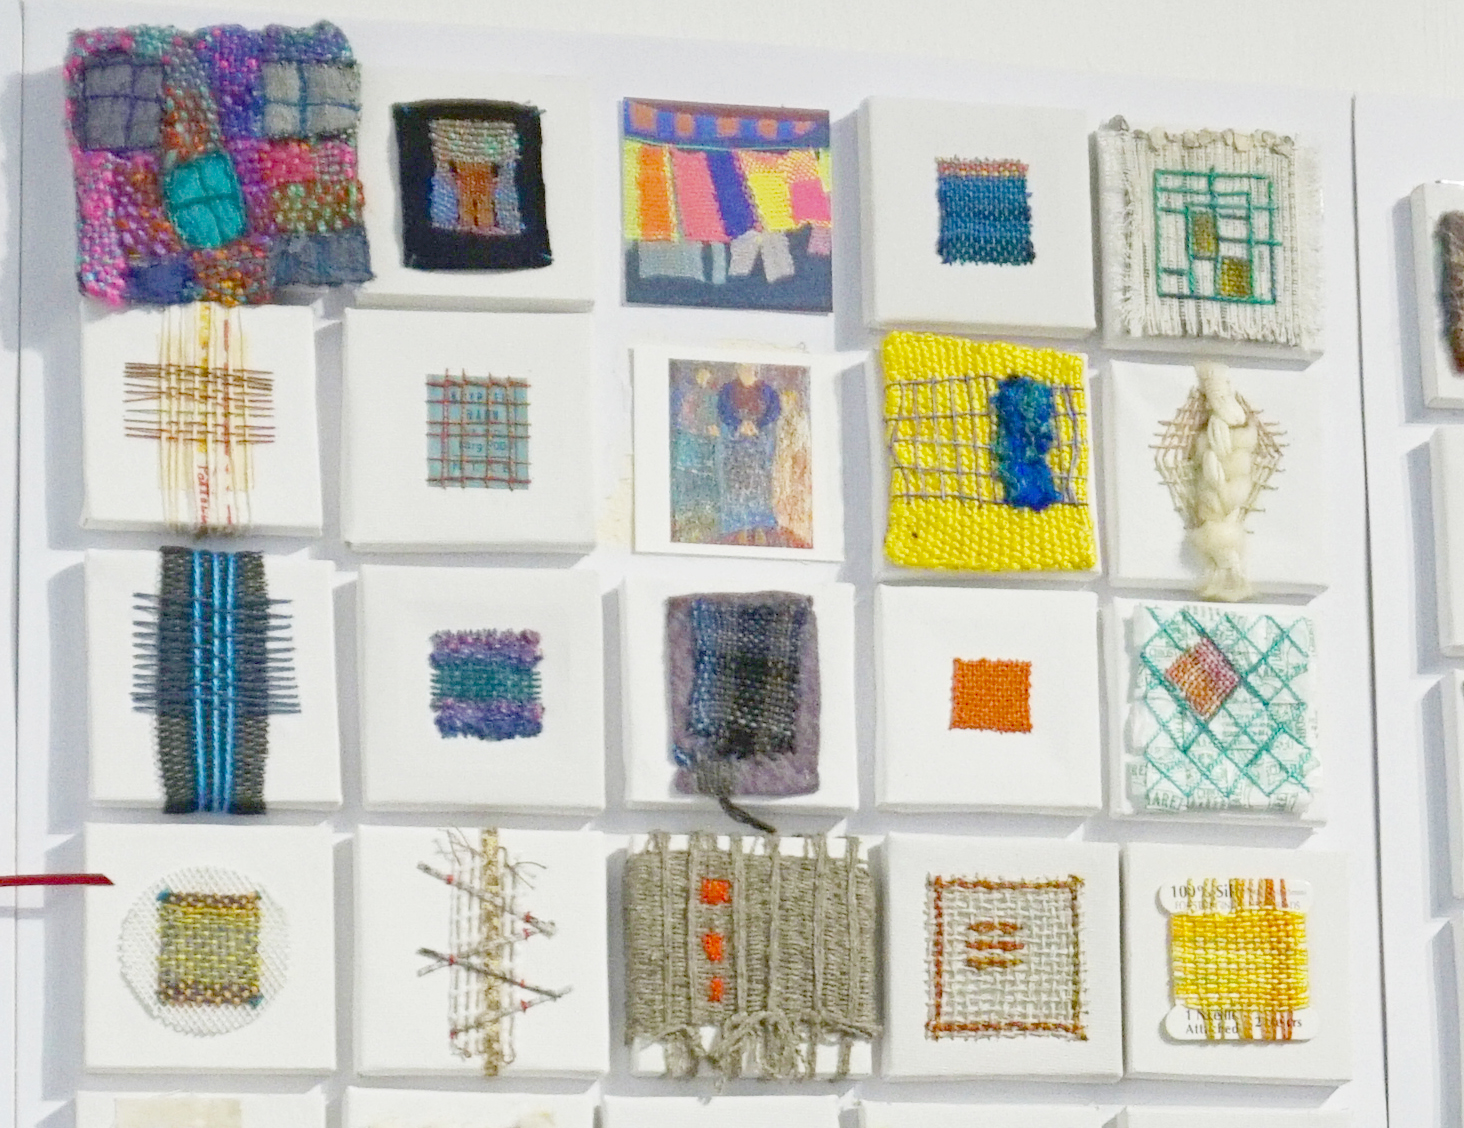 Small detailed pieces of textile art in an exhibition at the Knitting and Stitching Show 2017